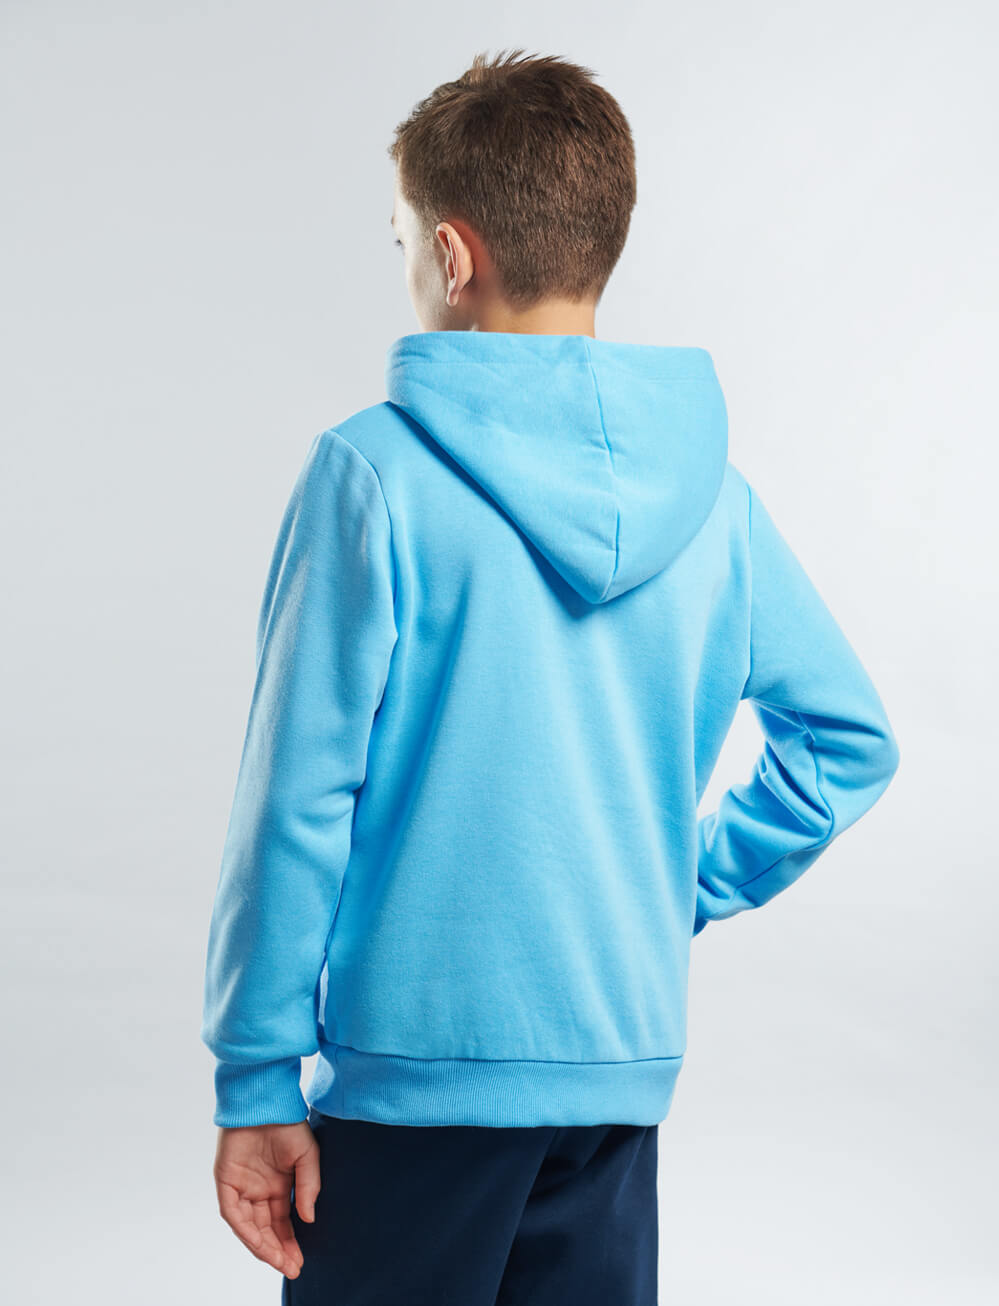 Official West Ham United Kids Logo Hoodie - Blue - The World Football Store